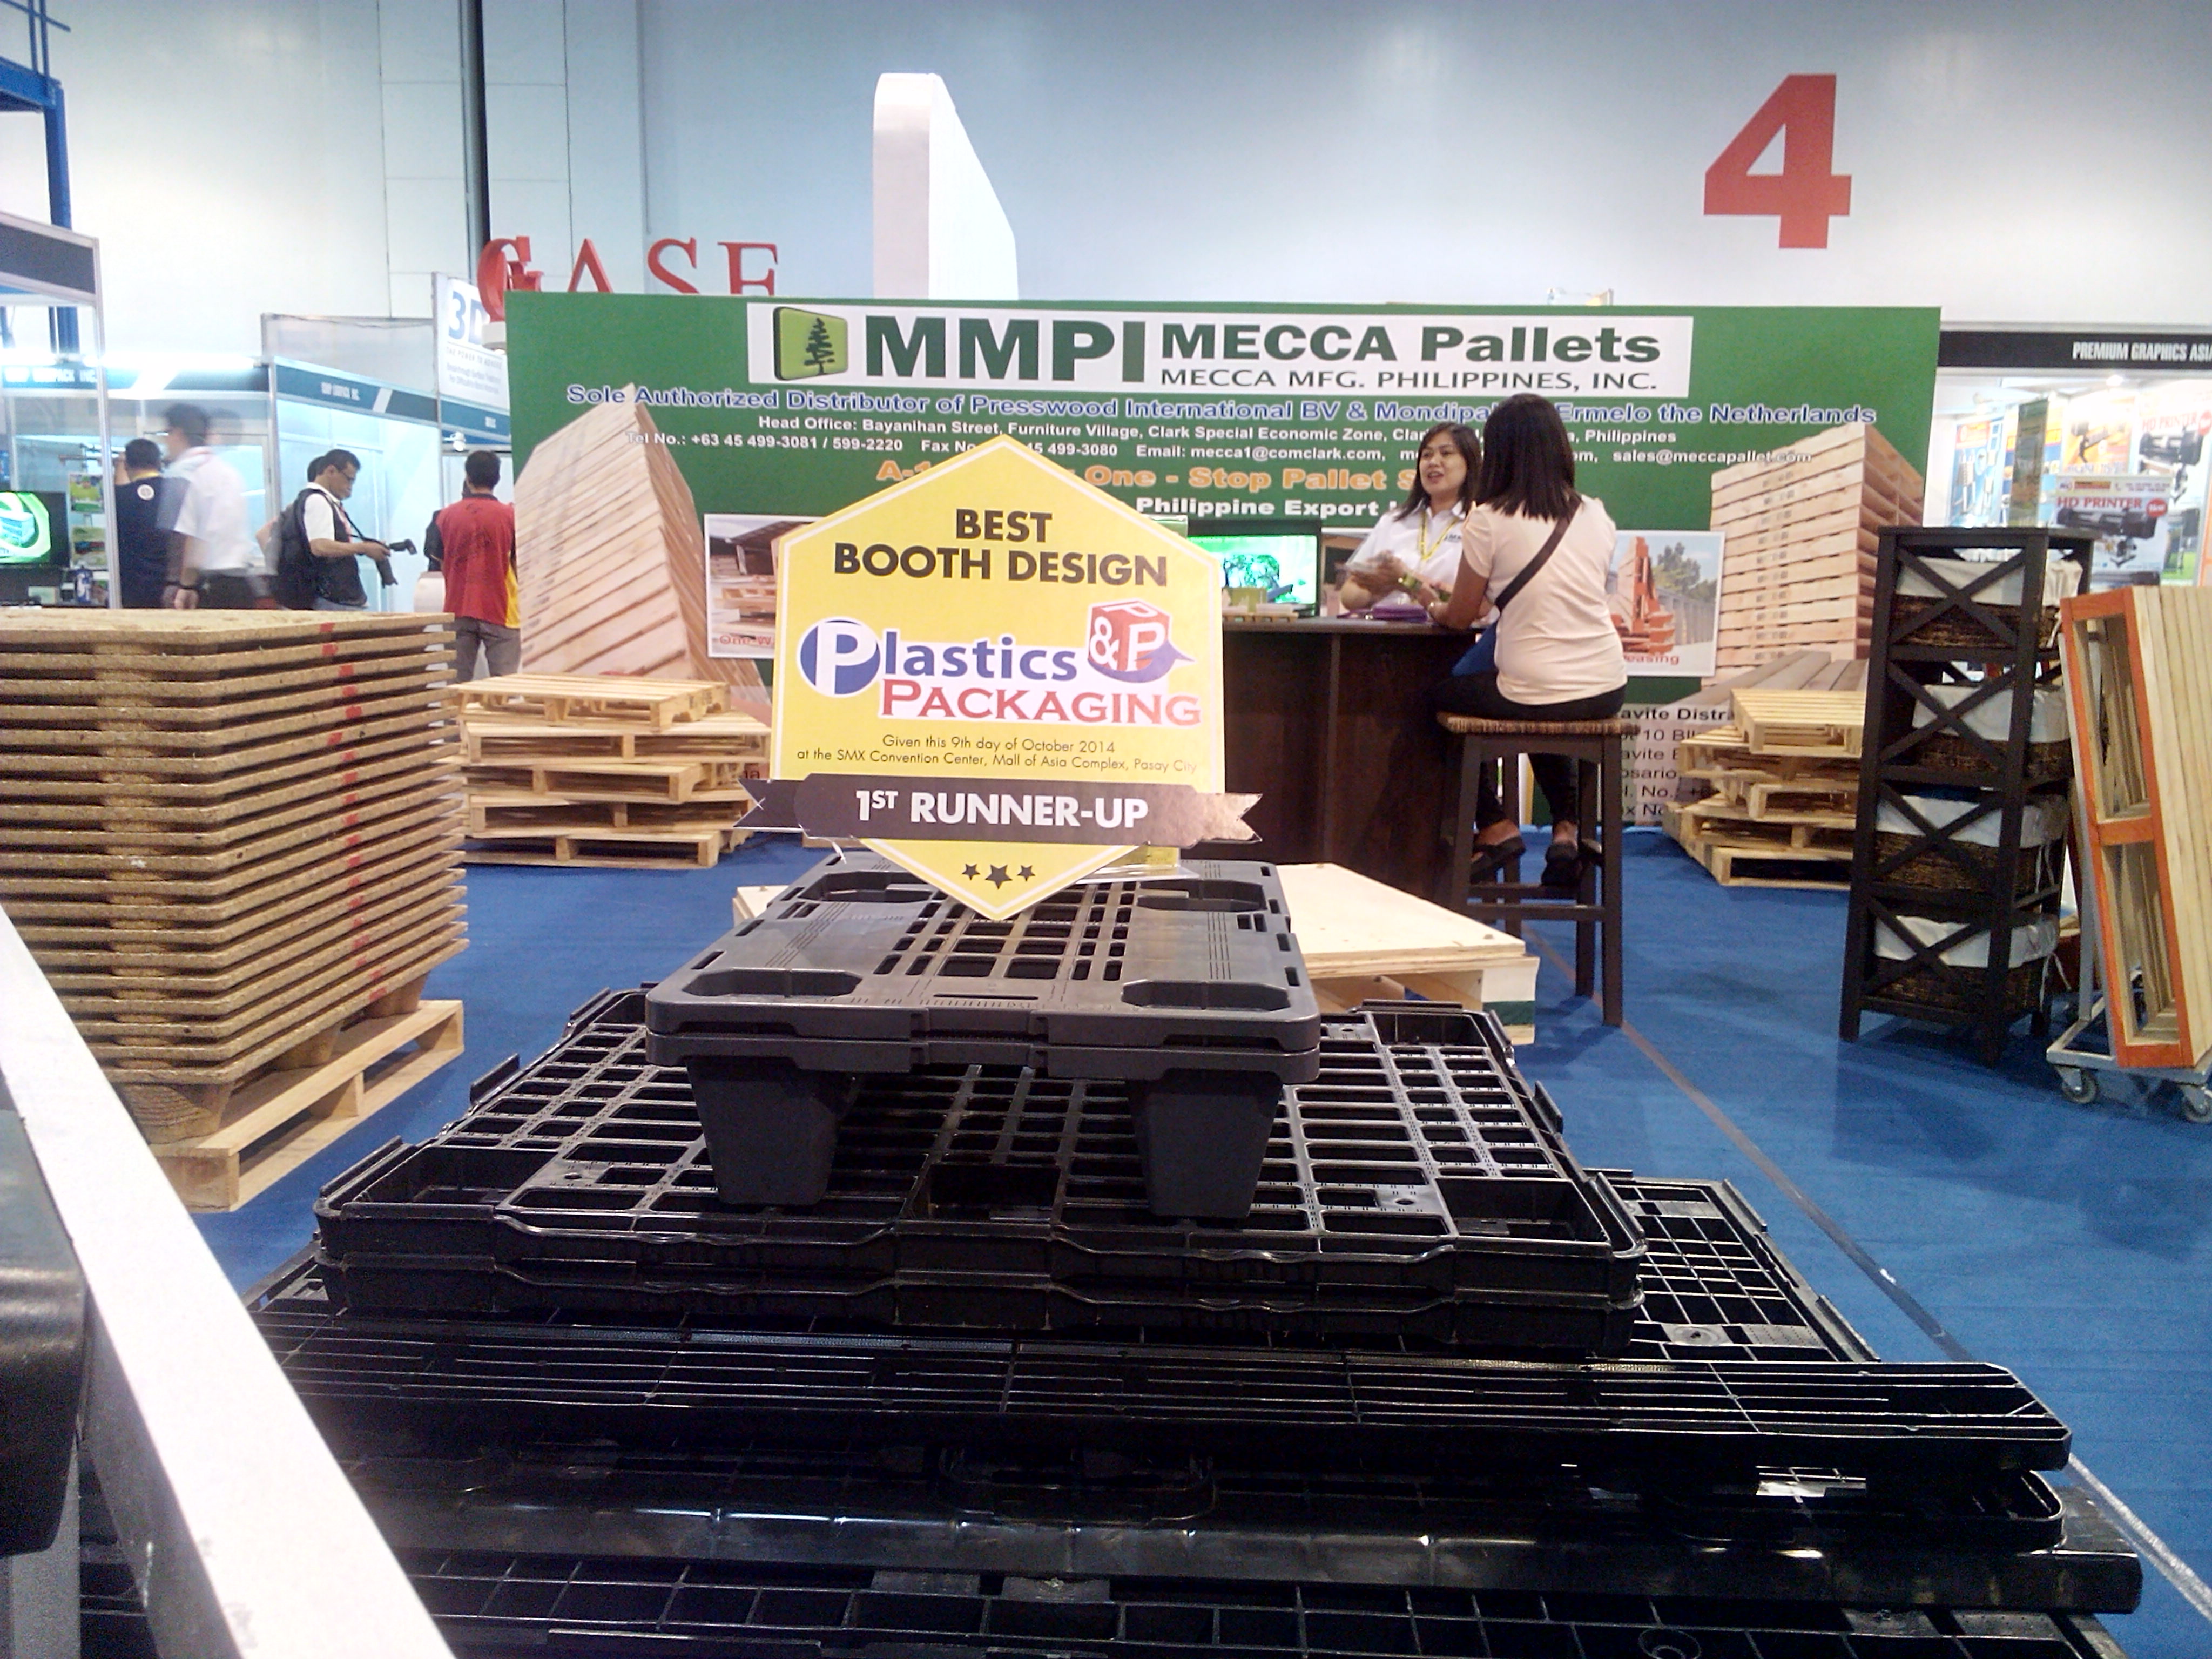 PLASTIC & PACKAGING BEST BOOTH DESIGN